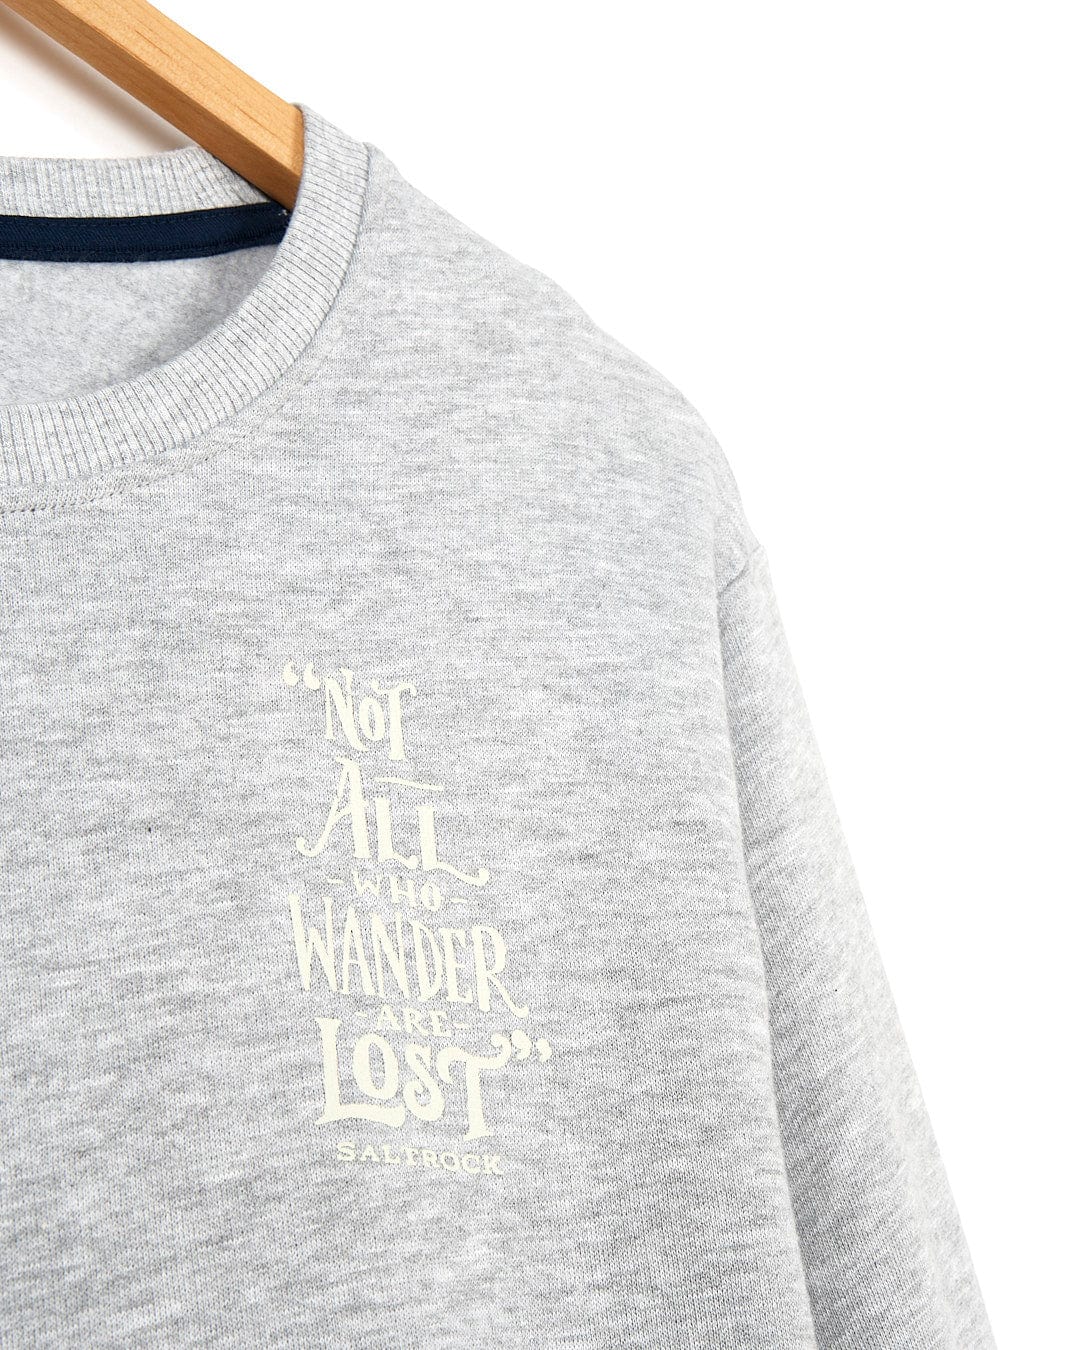 A Lost Ships - Mens Crew Sweat - Grey sweatshirt with the words 'not all the wanderer lost' embroidered on it by Saltrock.